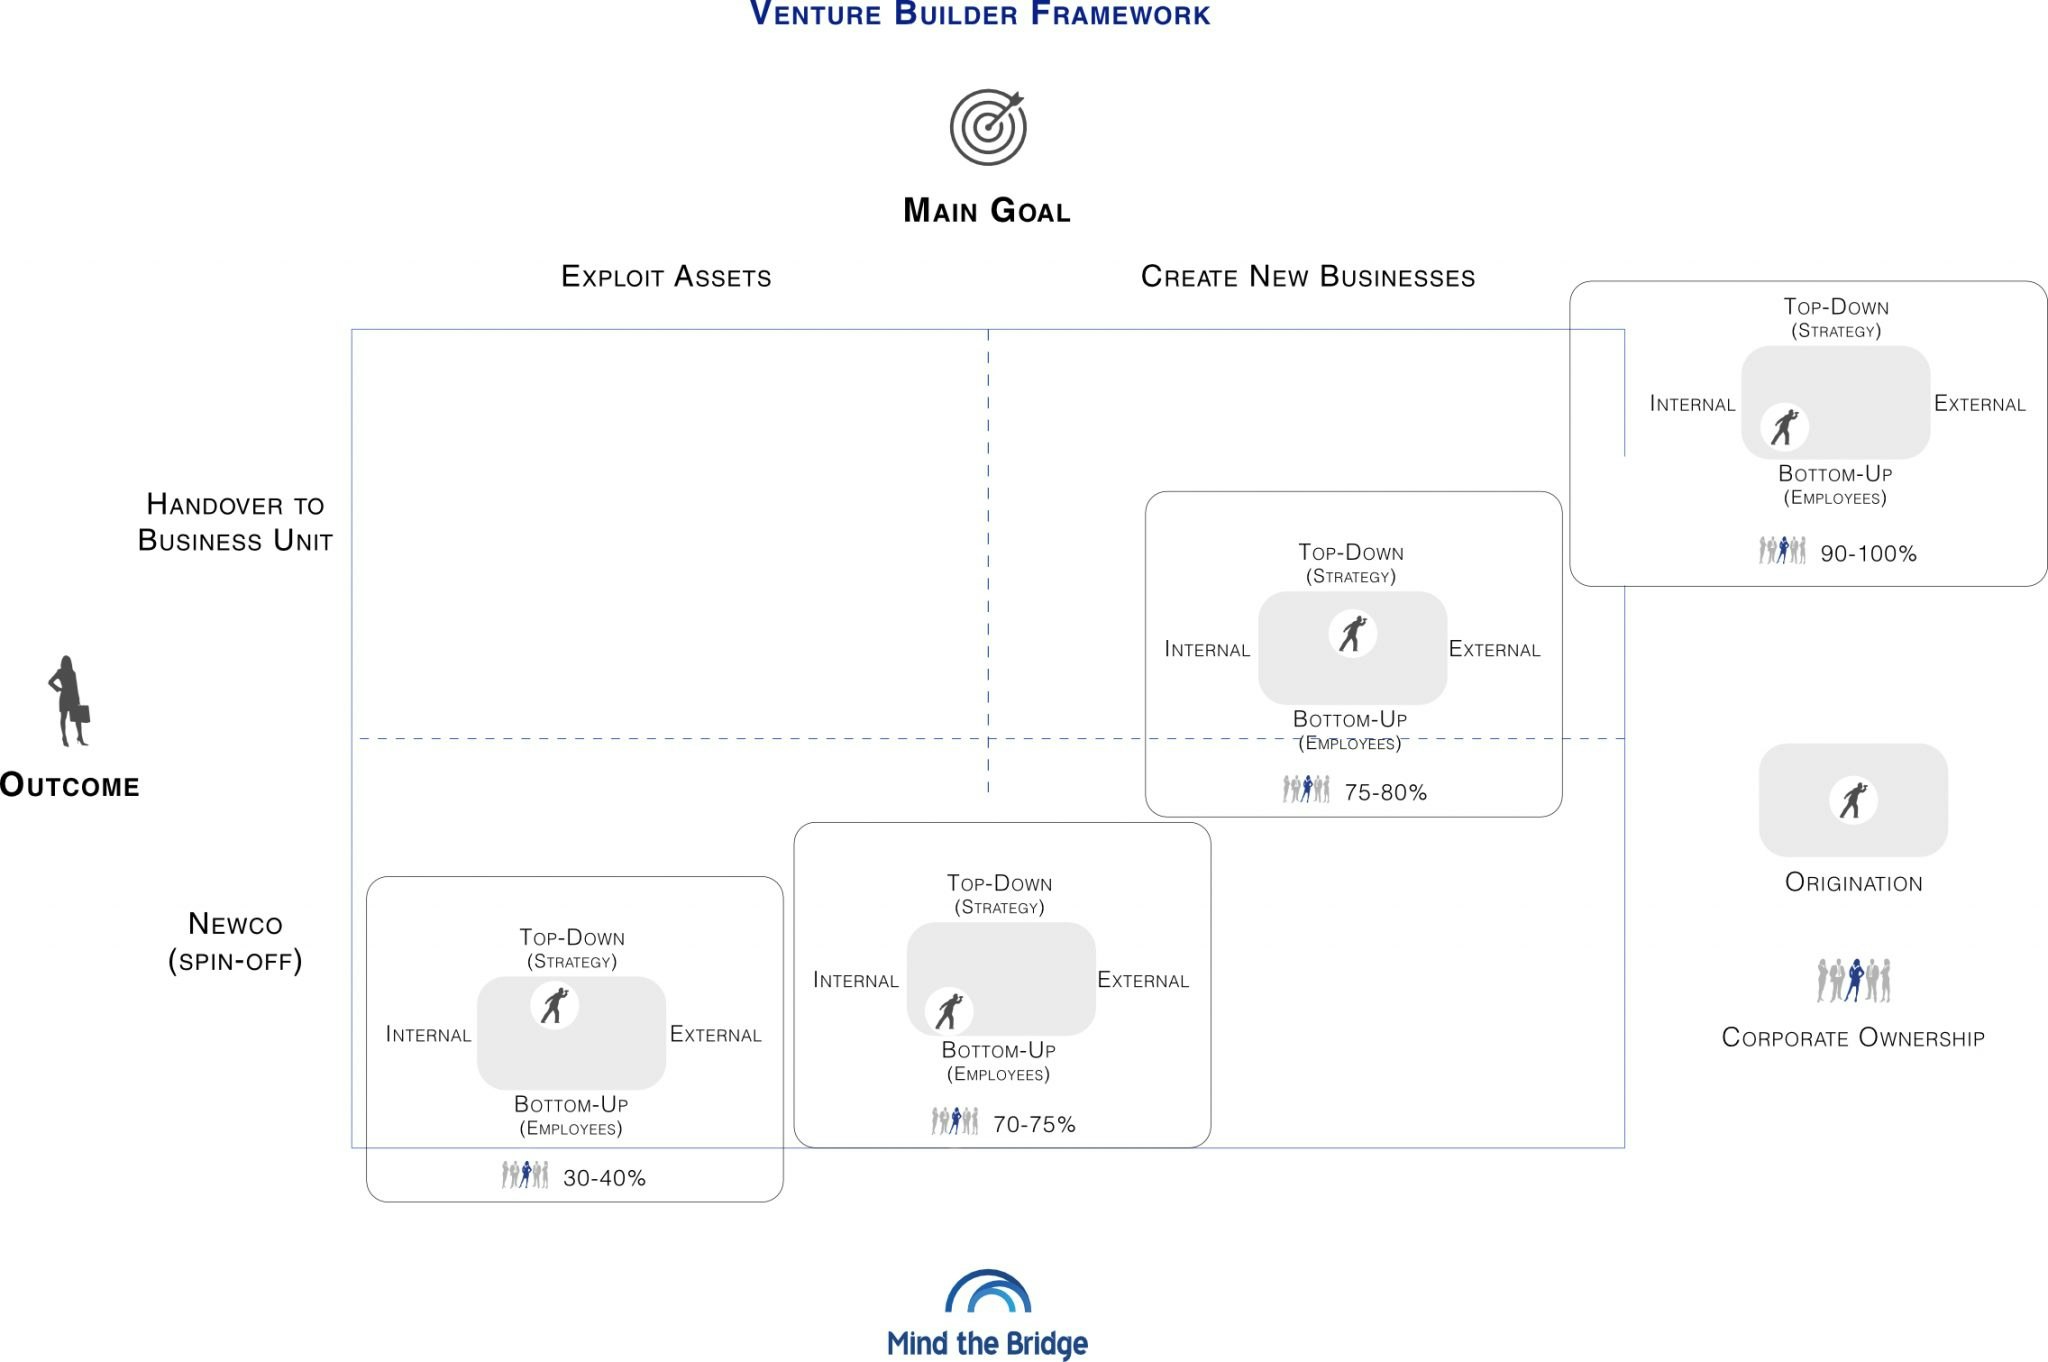 Chart showing different types of venture builder